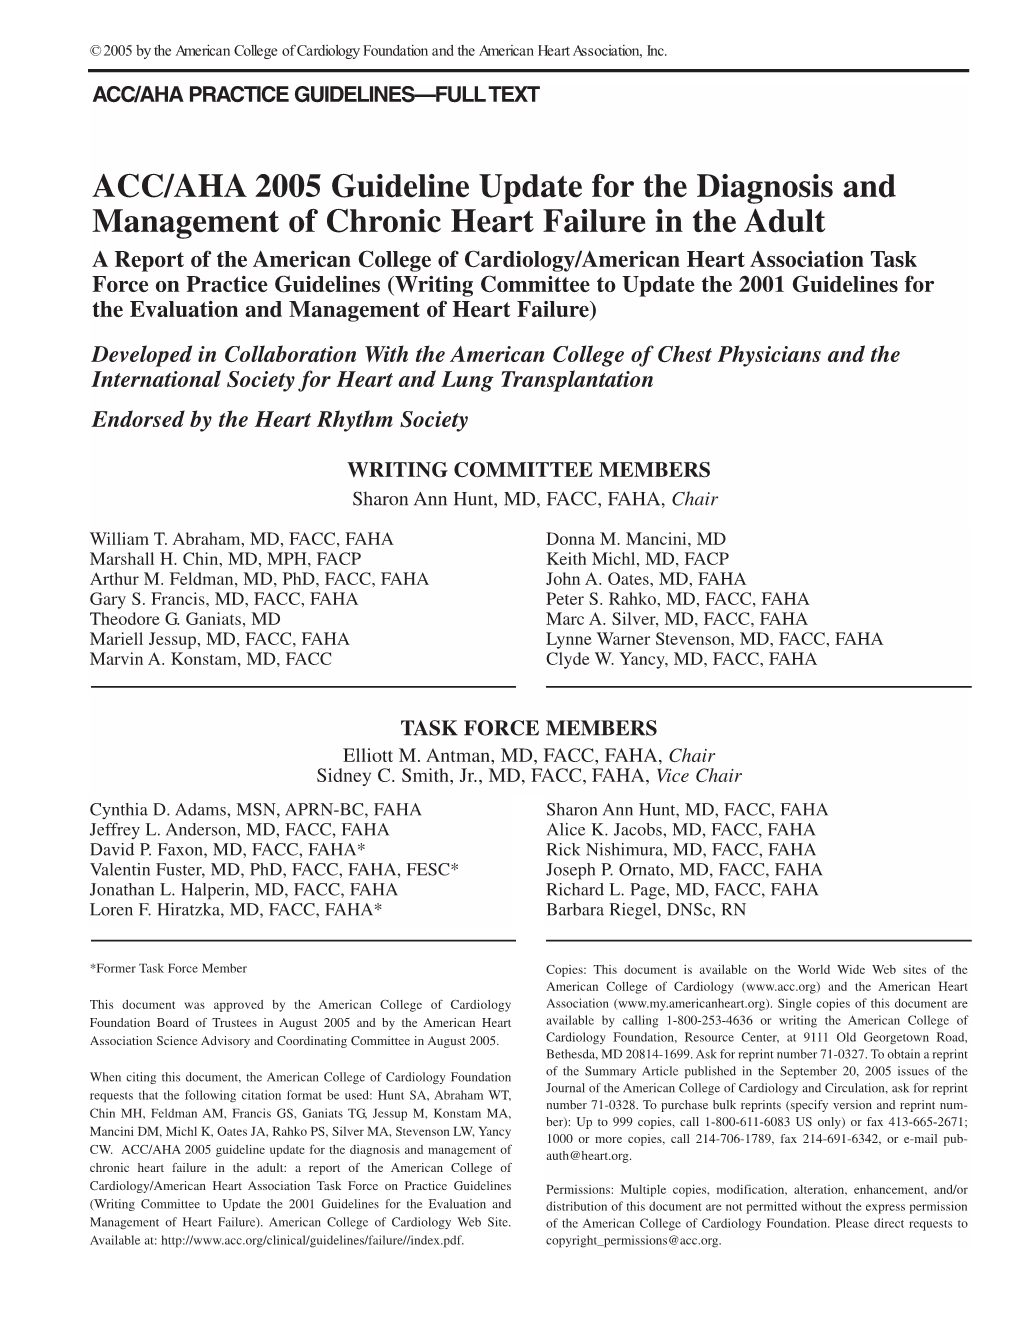 ACC/AHA 2005 Guideline Update for the Diagnosis and Management Of